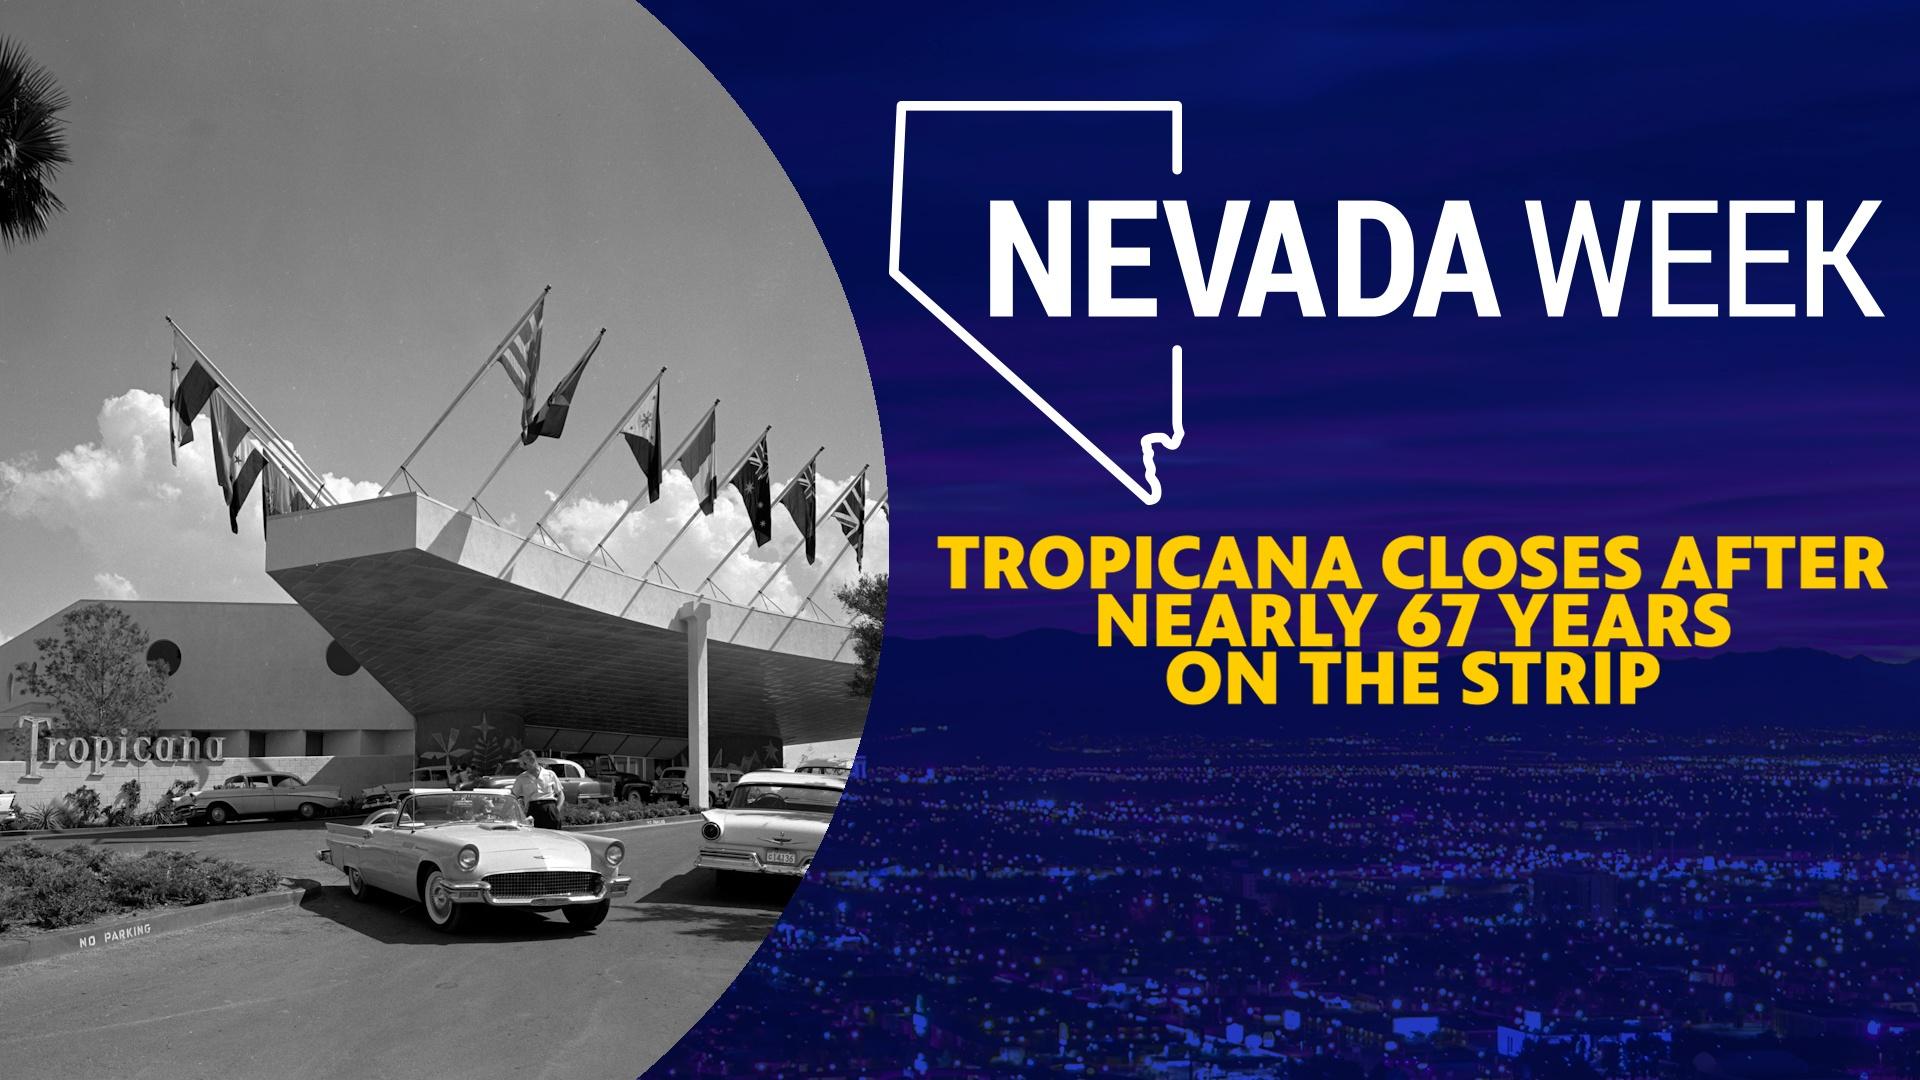 Tropicana Closes After Nearly 67 Years on the Strip